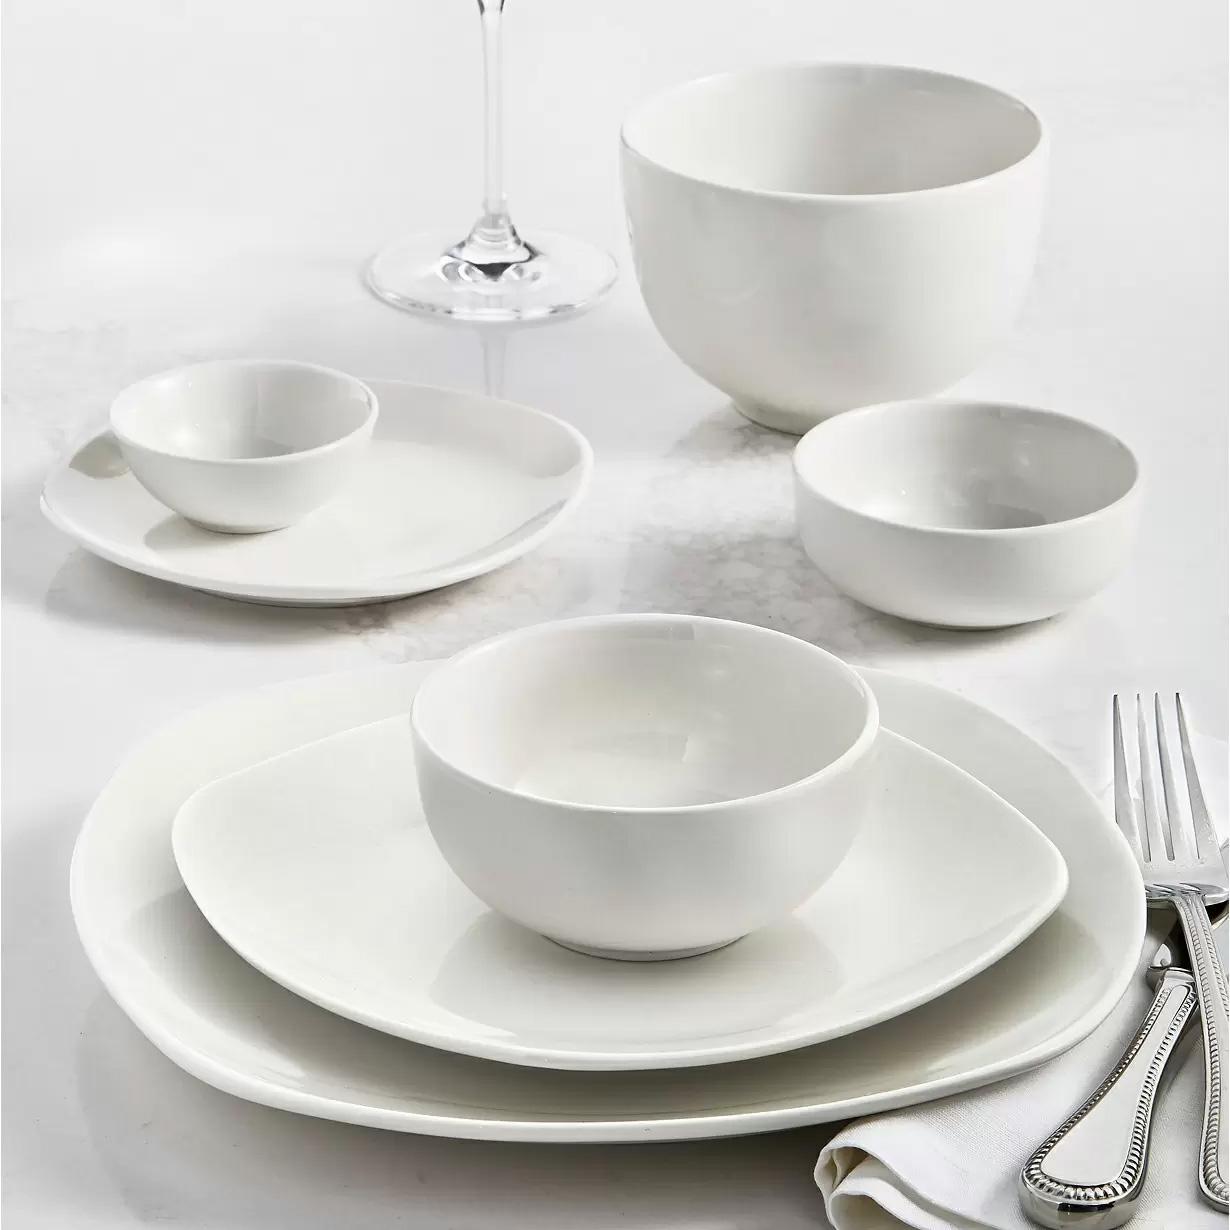 42-Piece Tabletops Unlimited Inspiration Whiteware Dinnerware Set for $37.99 Shipped